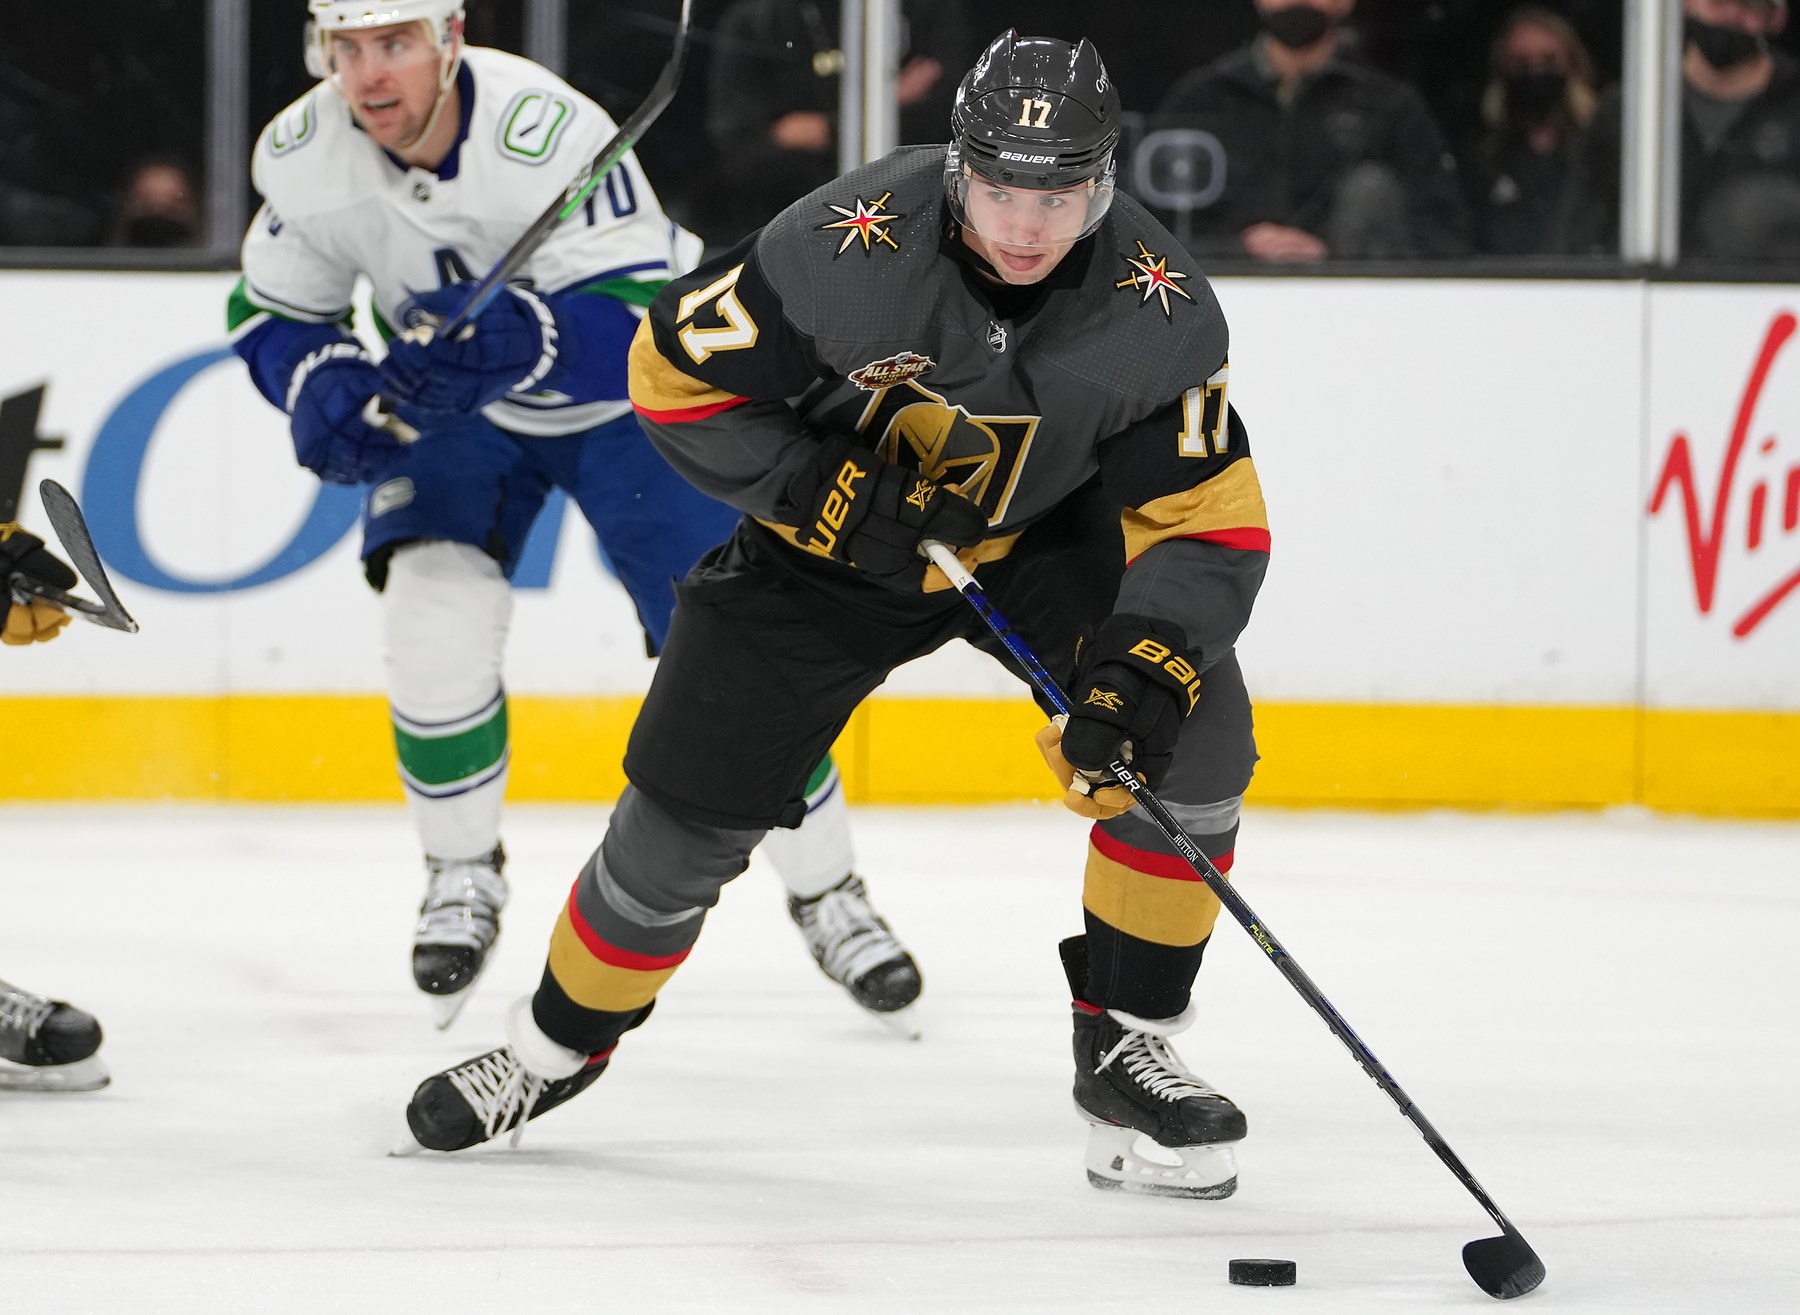 Vegas Golden Knights defenseman Ben Hutton (17) looks to pass the puck during the third period against the Vancouver Canucks